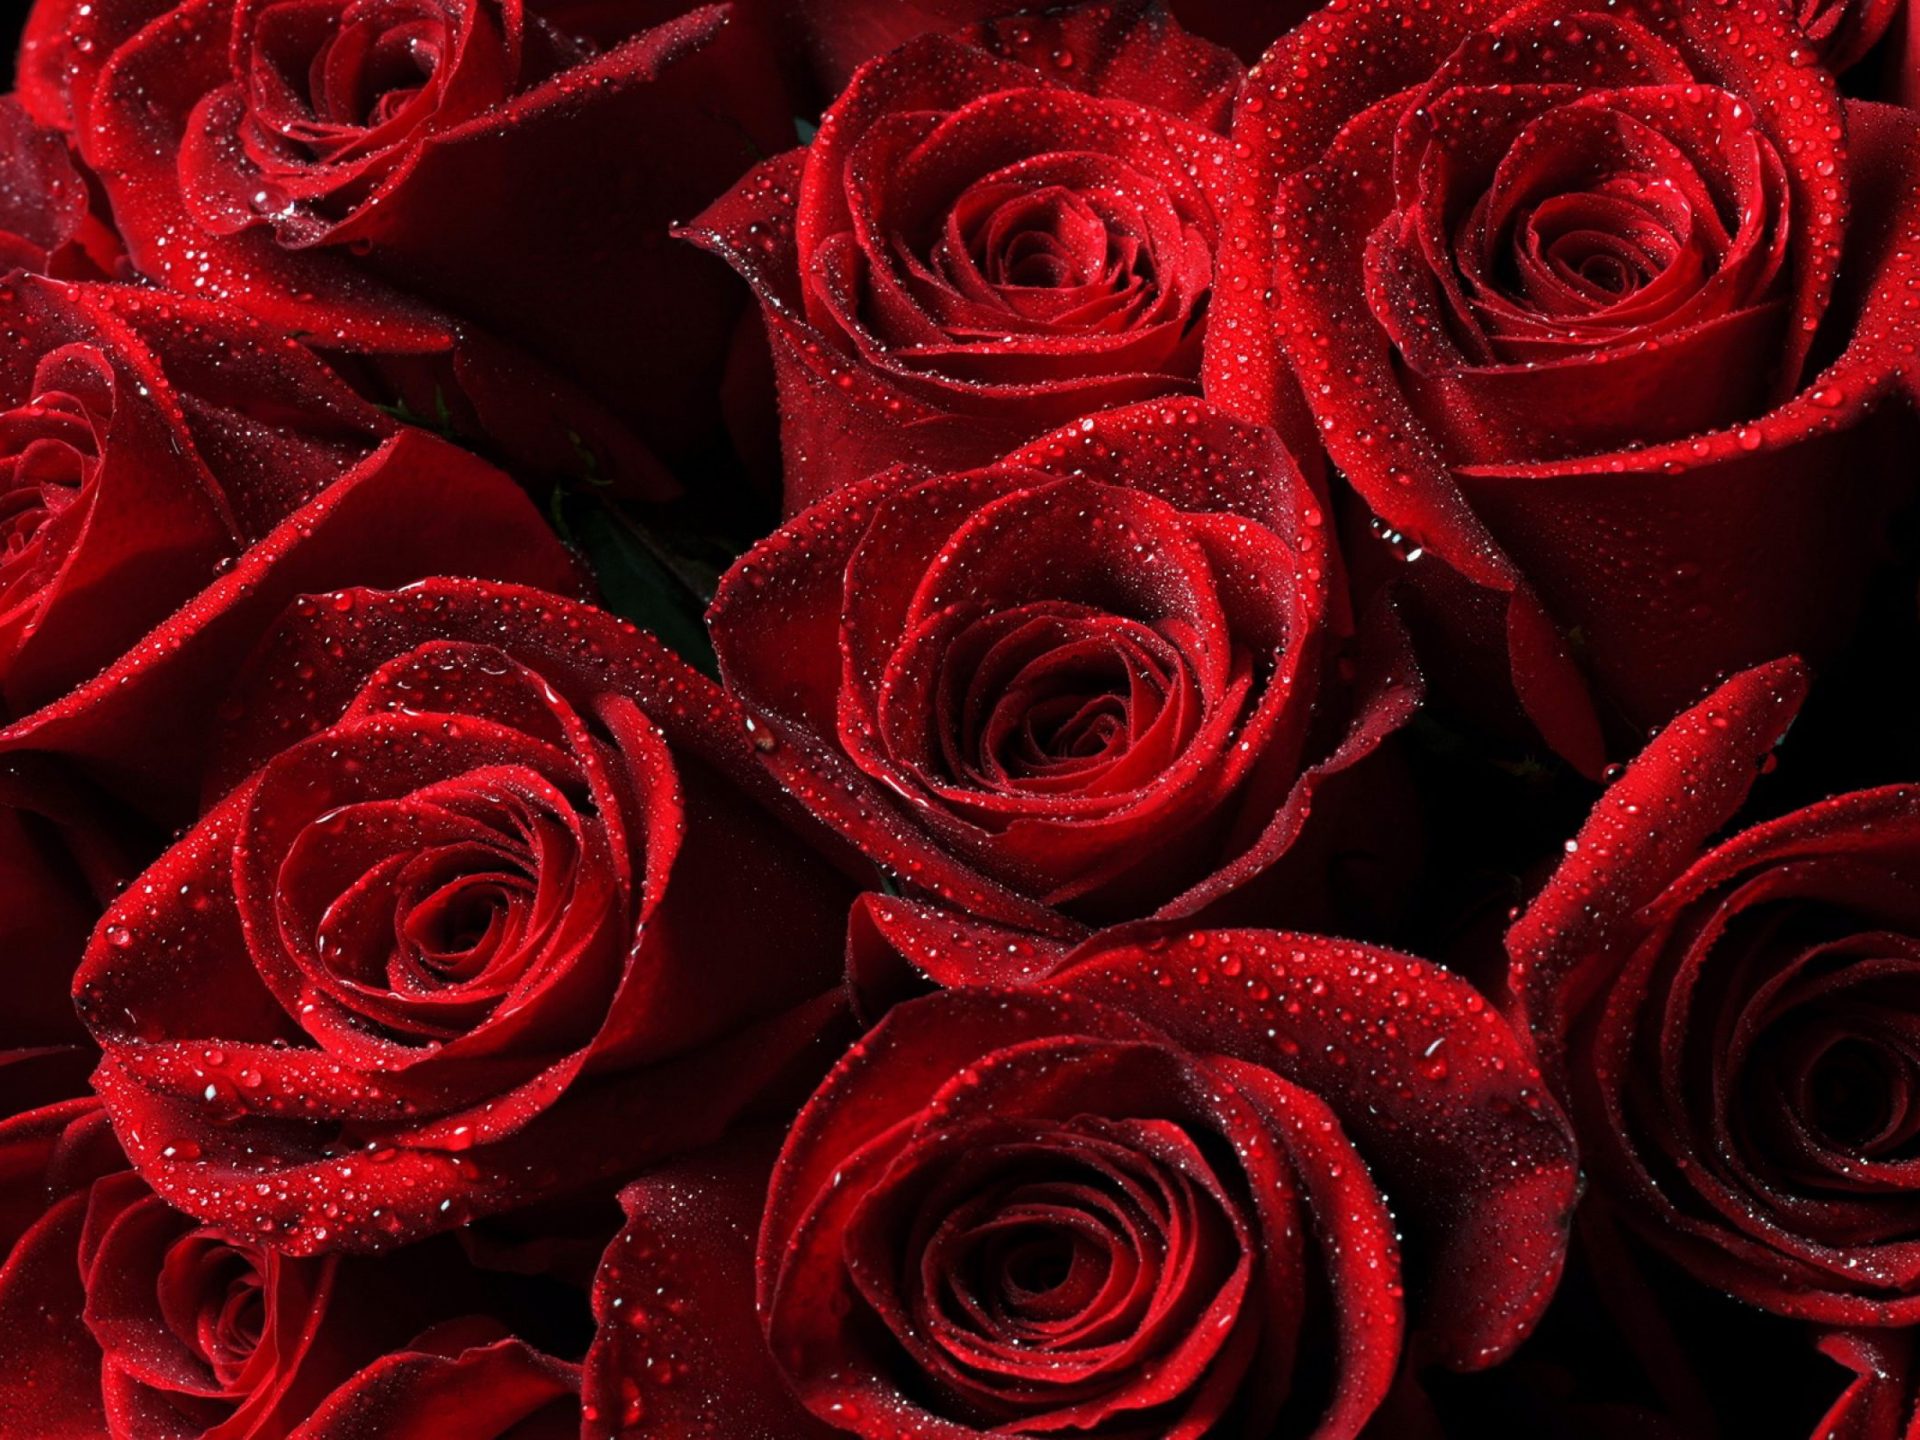 Aesthetic Red Roses Background - 1920x1440 Wallpaper - teahub.io